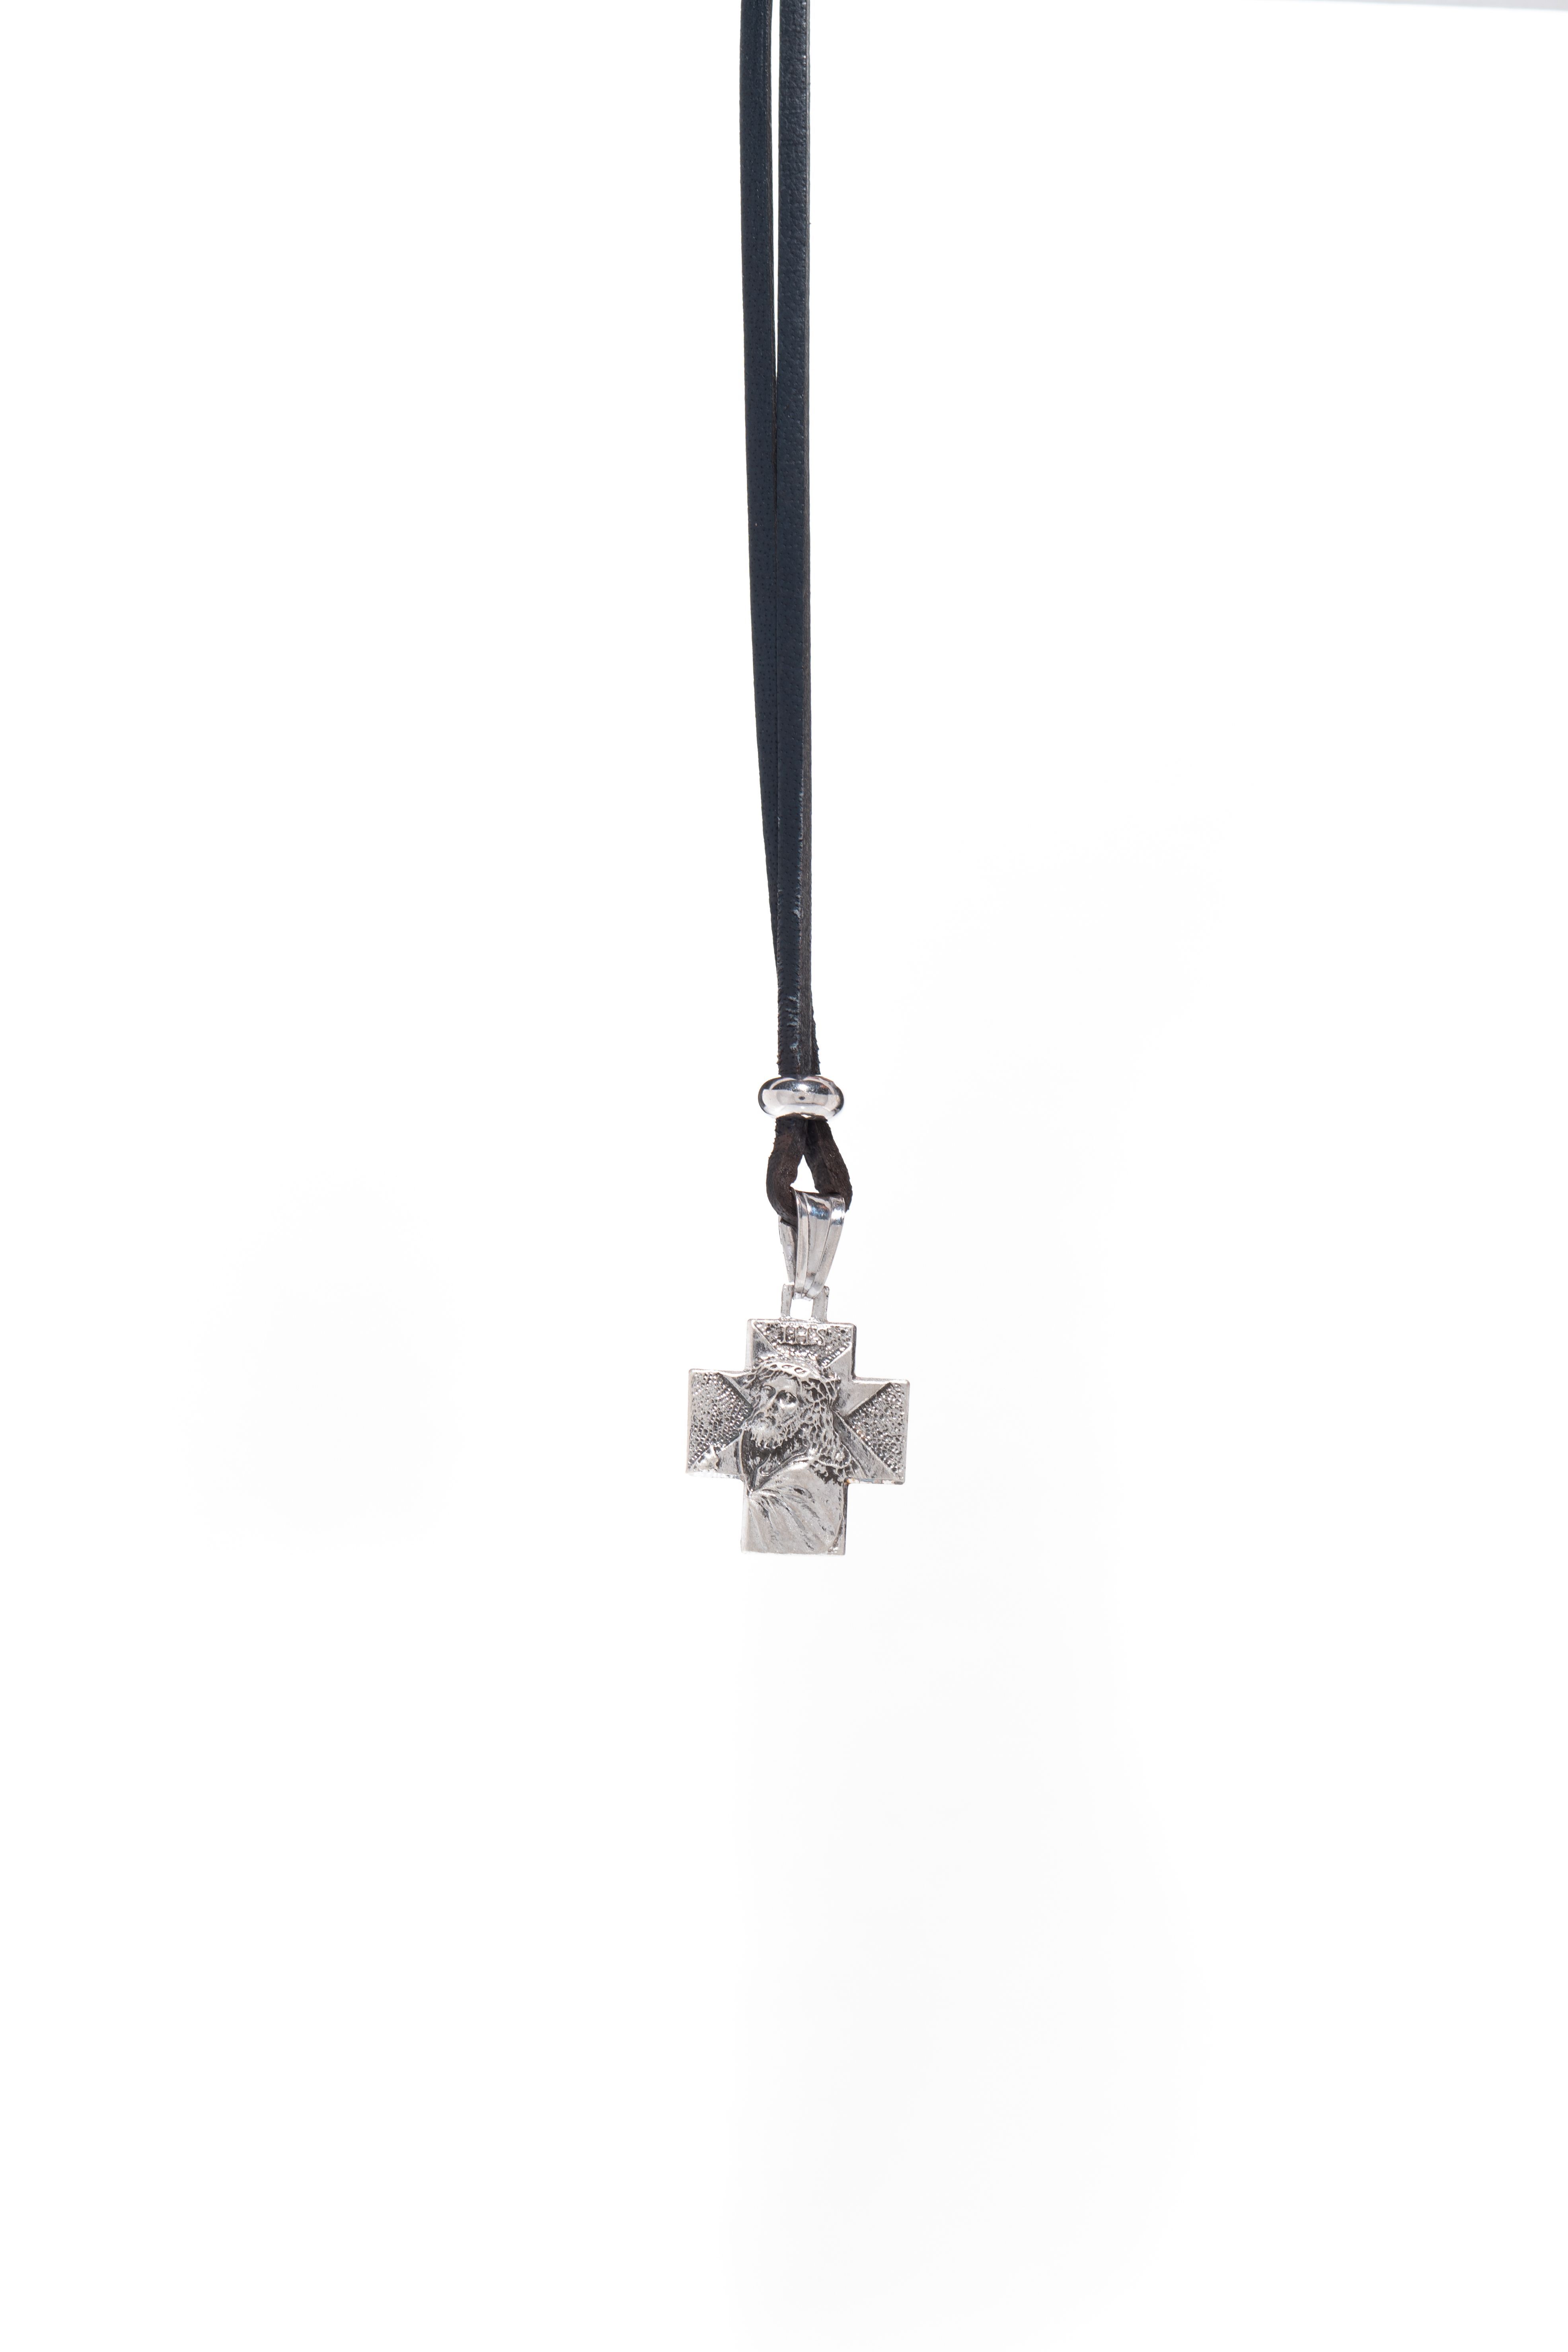 Cross necklace in rhodium-plated 925° silver with blue cord (AGI325-C BL)